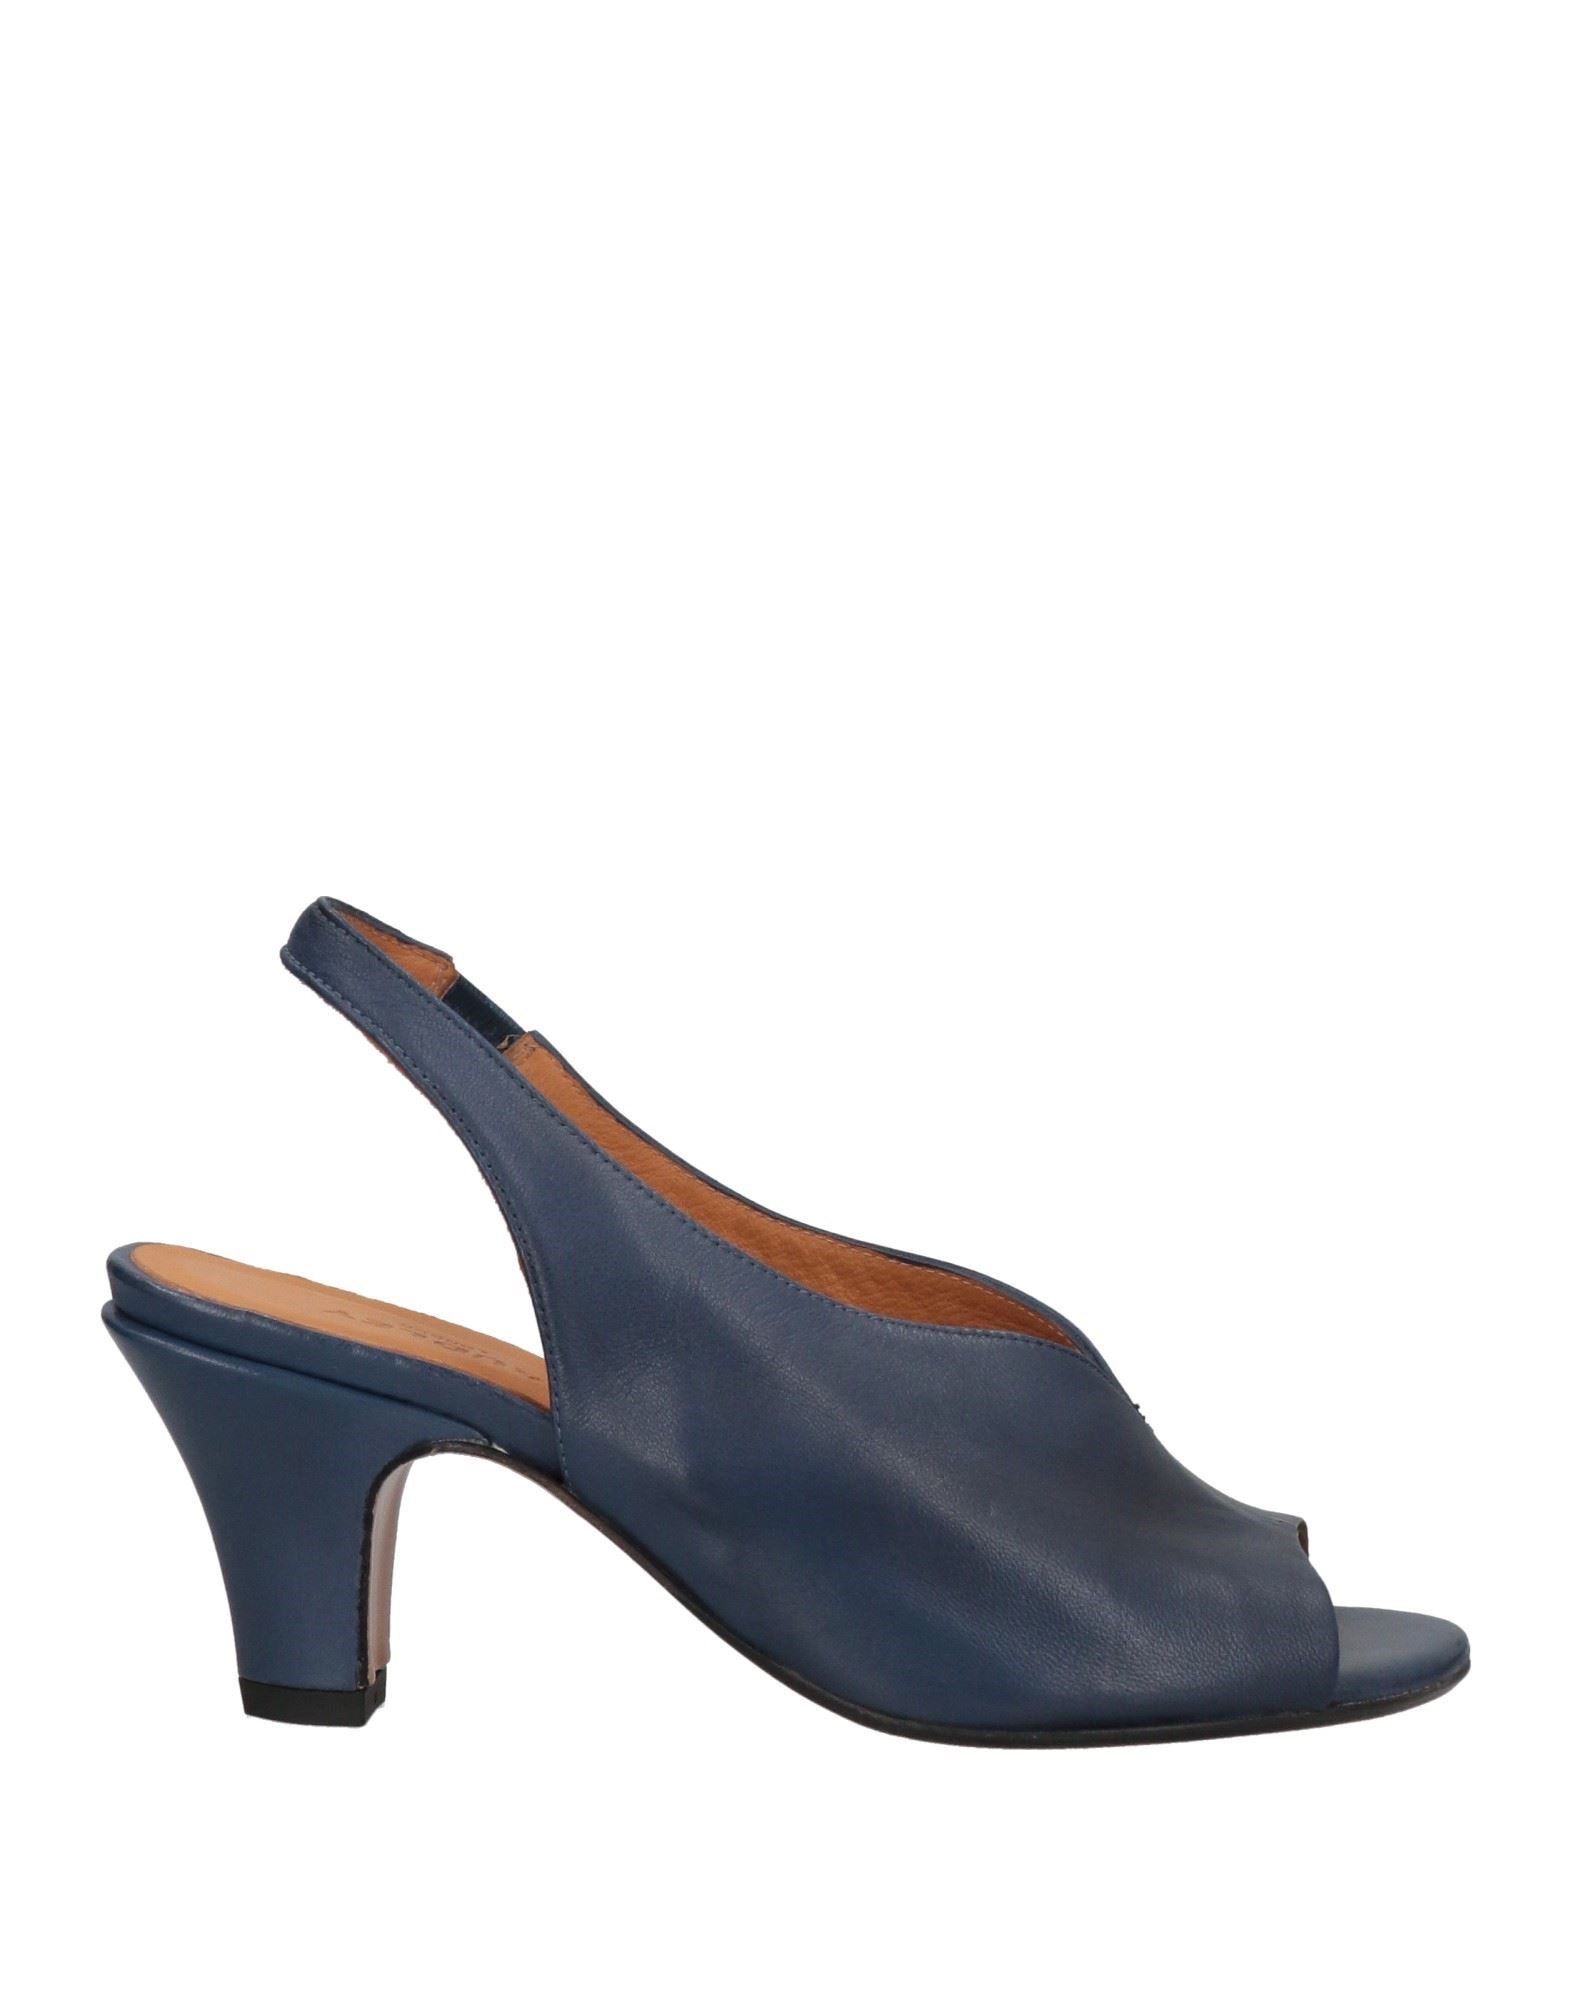 Audley Sandals In Navy Blue